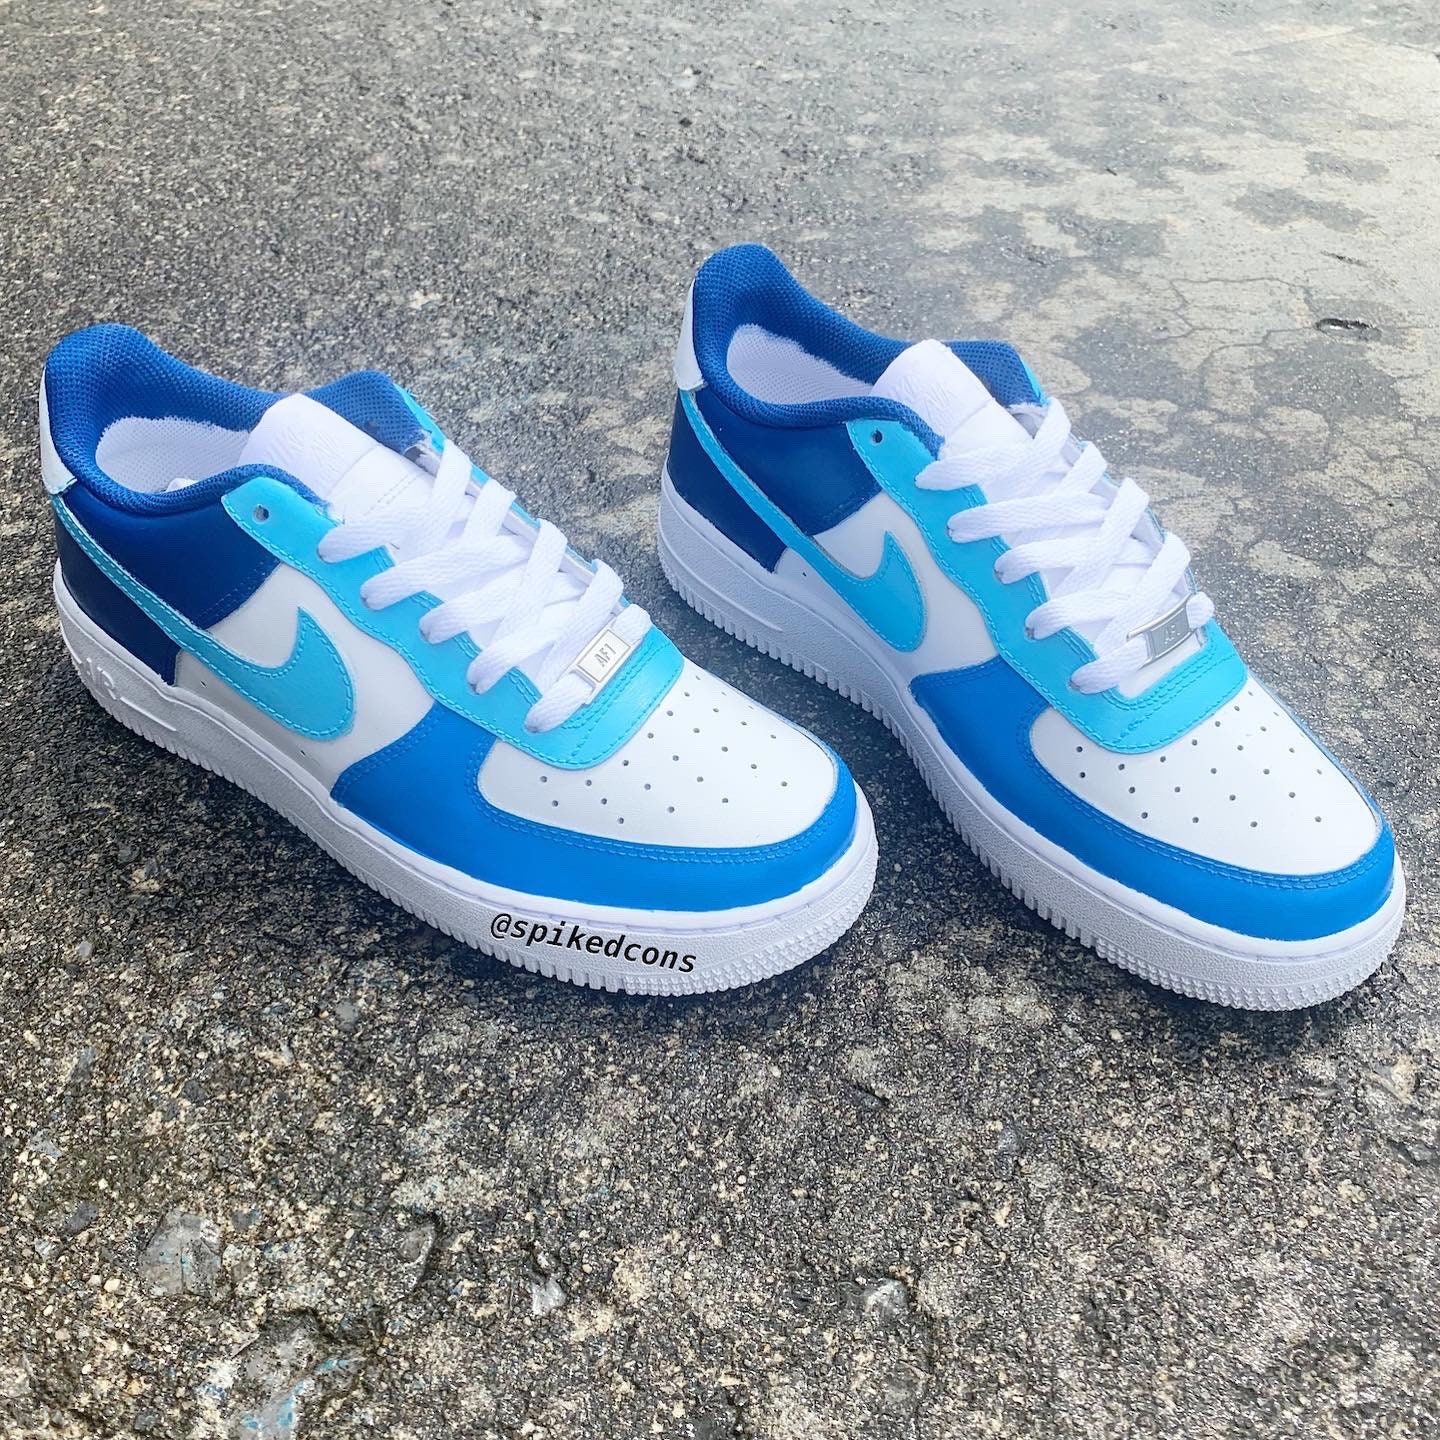 Custom 3 Shades of the Blues af1check Sizing Before -   Nike shoes  blue, Air force one shoes, Blue nike air force